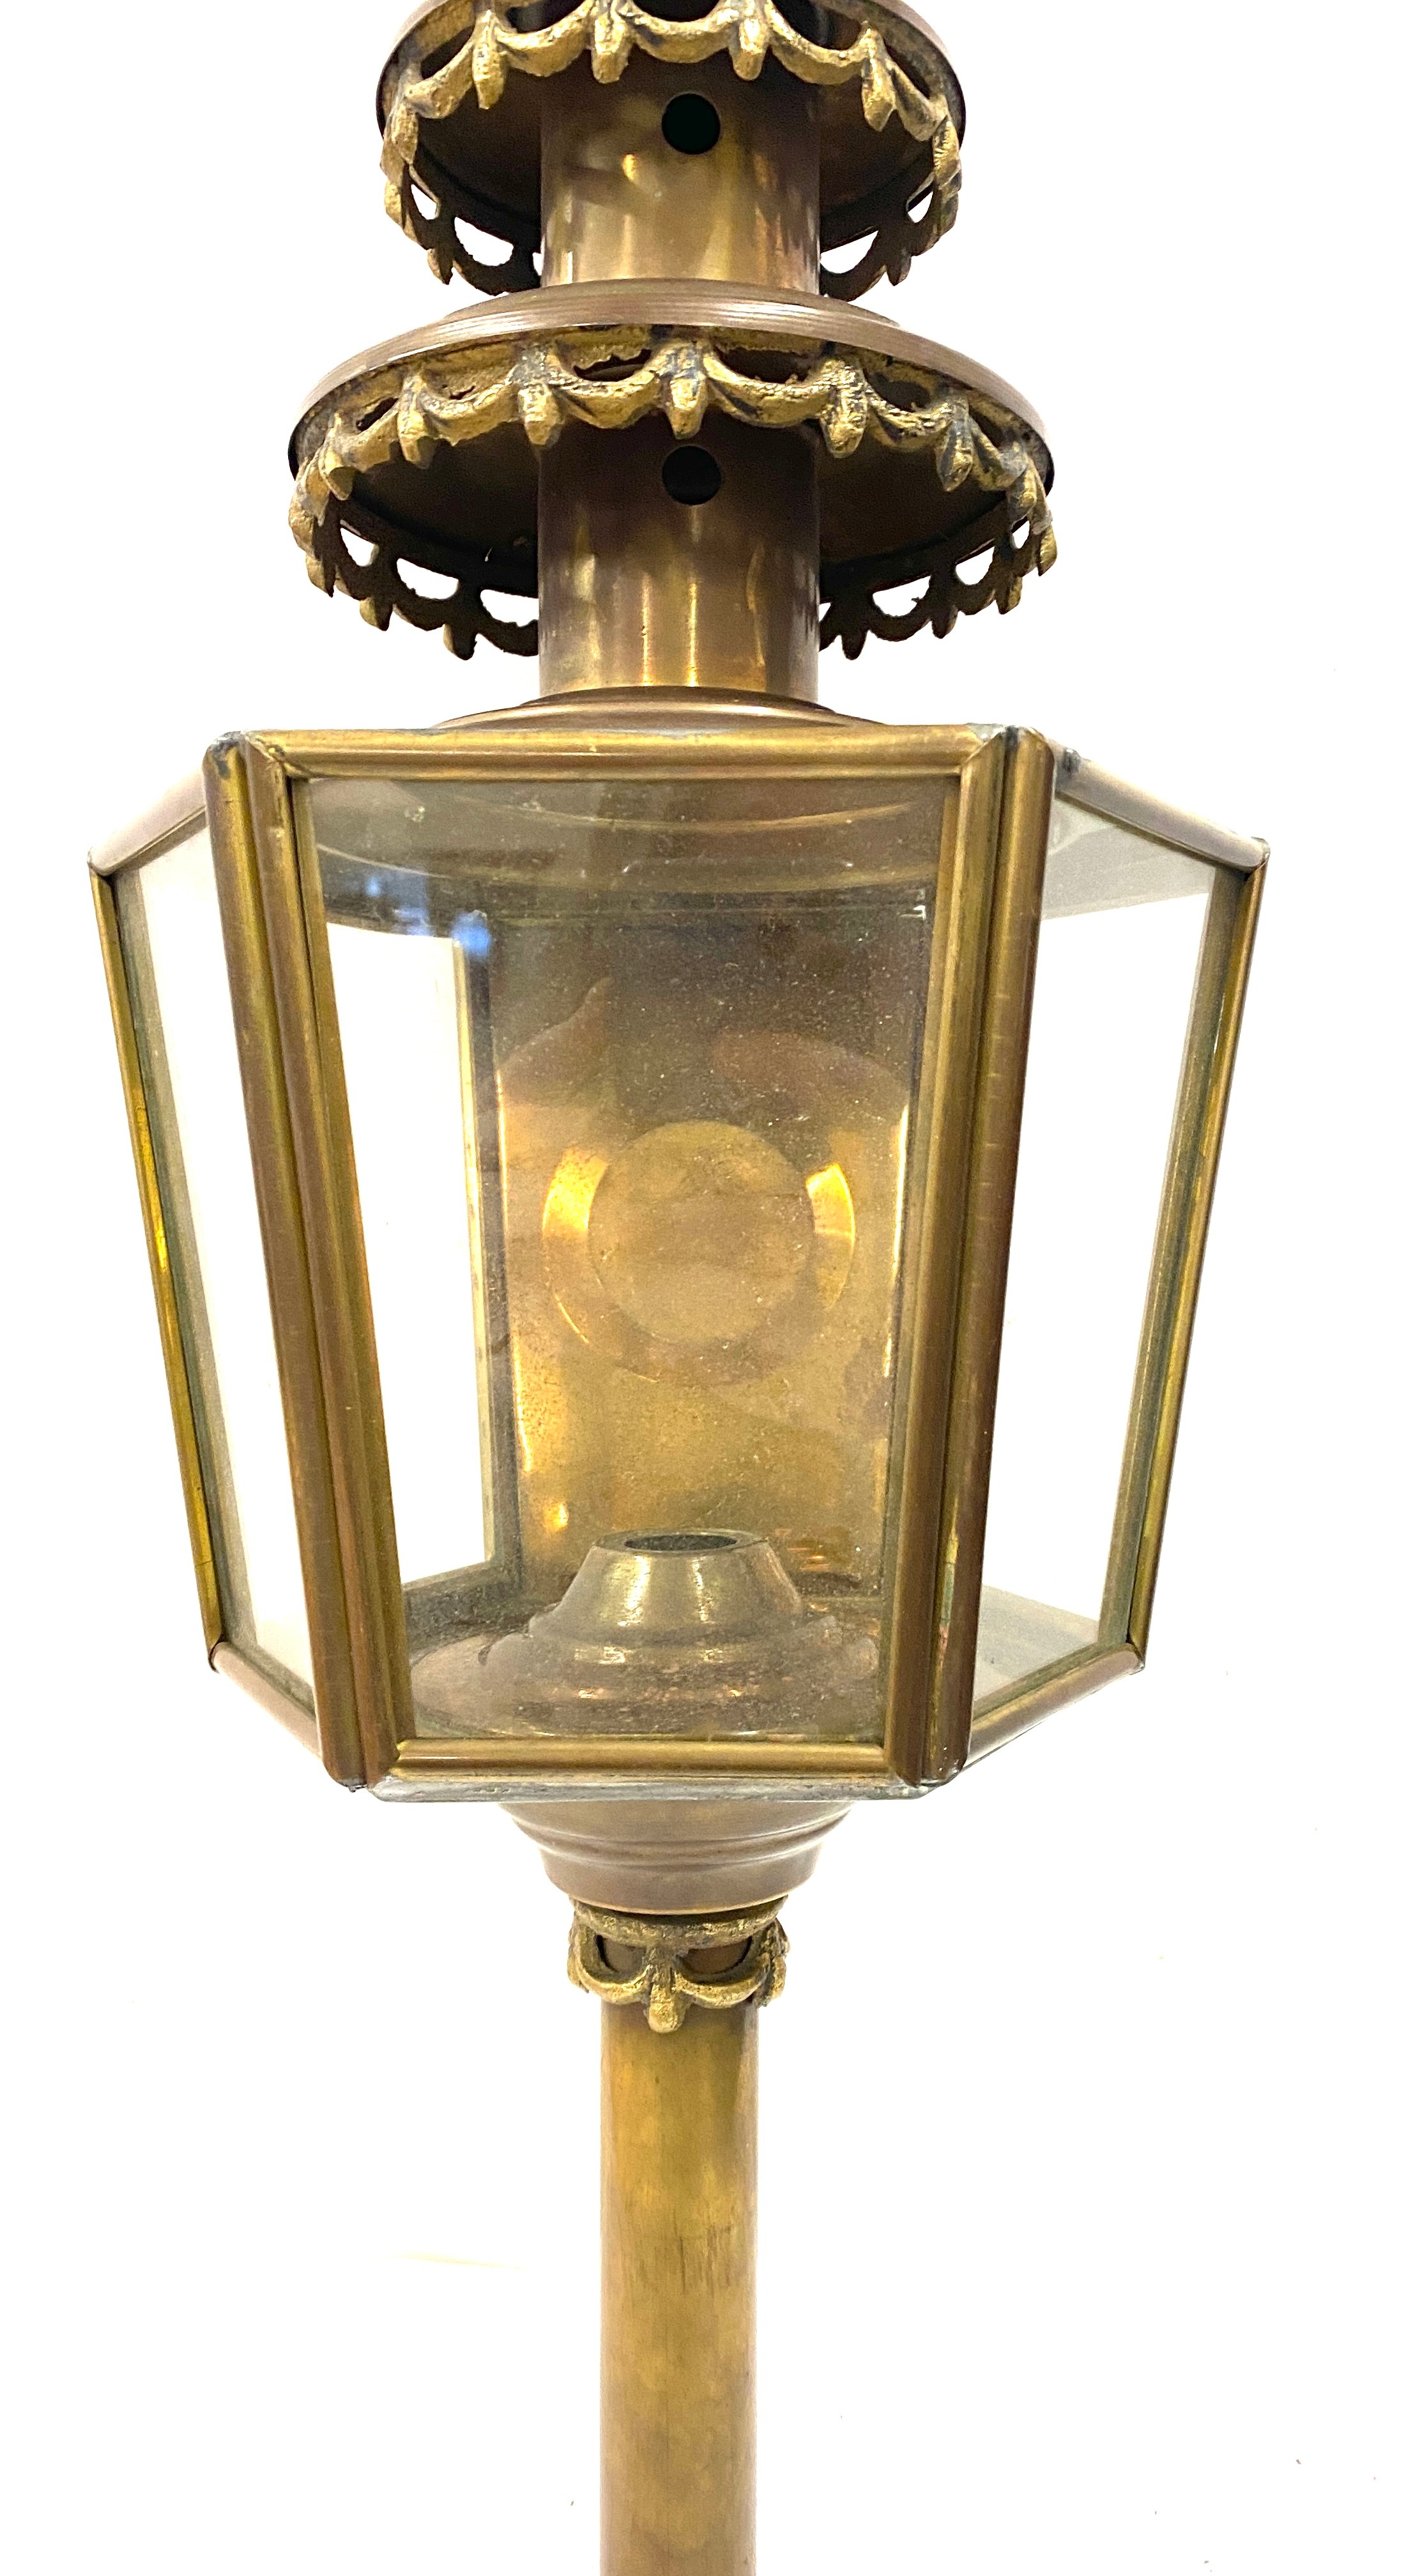 Vintage brass outdoor carriage light, height 26 inches - Image 4 of 6